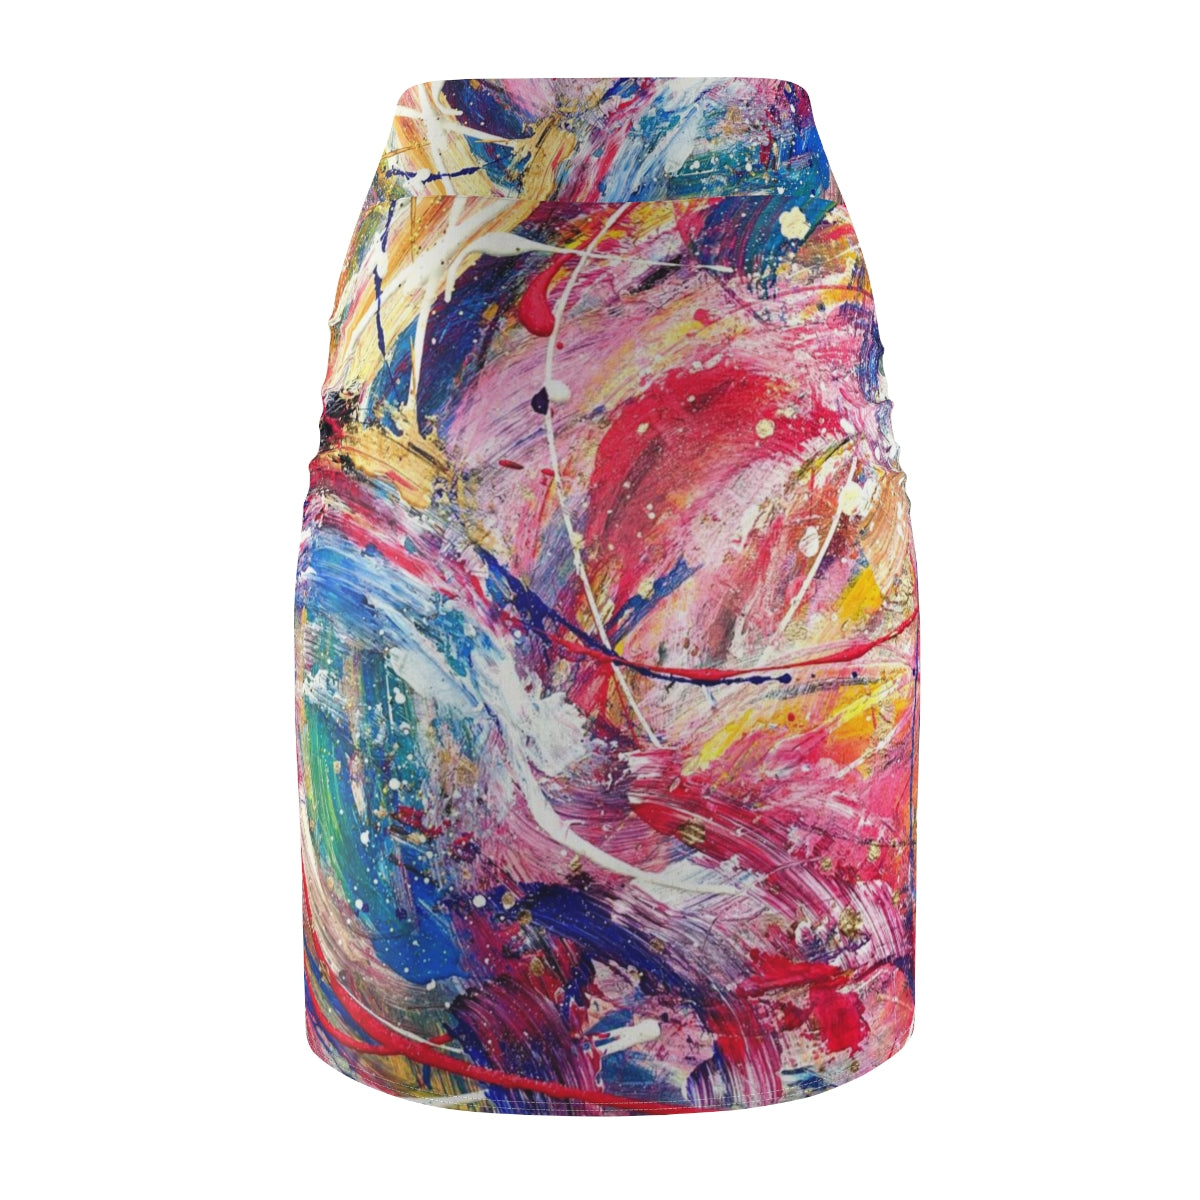 "Free to Move & Change" Women's Pencil Skirt